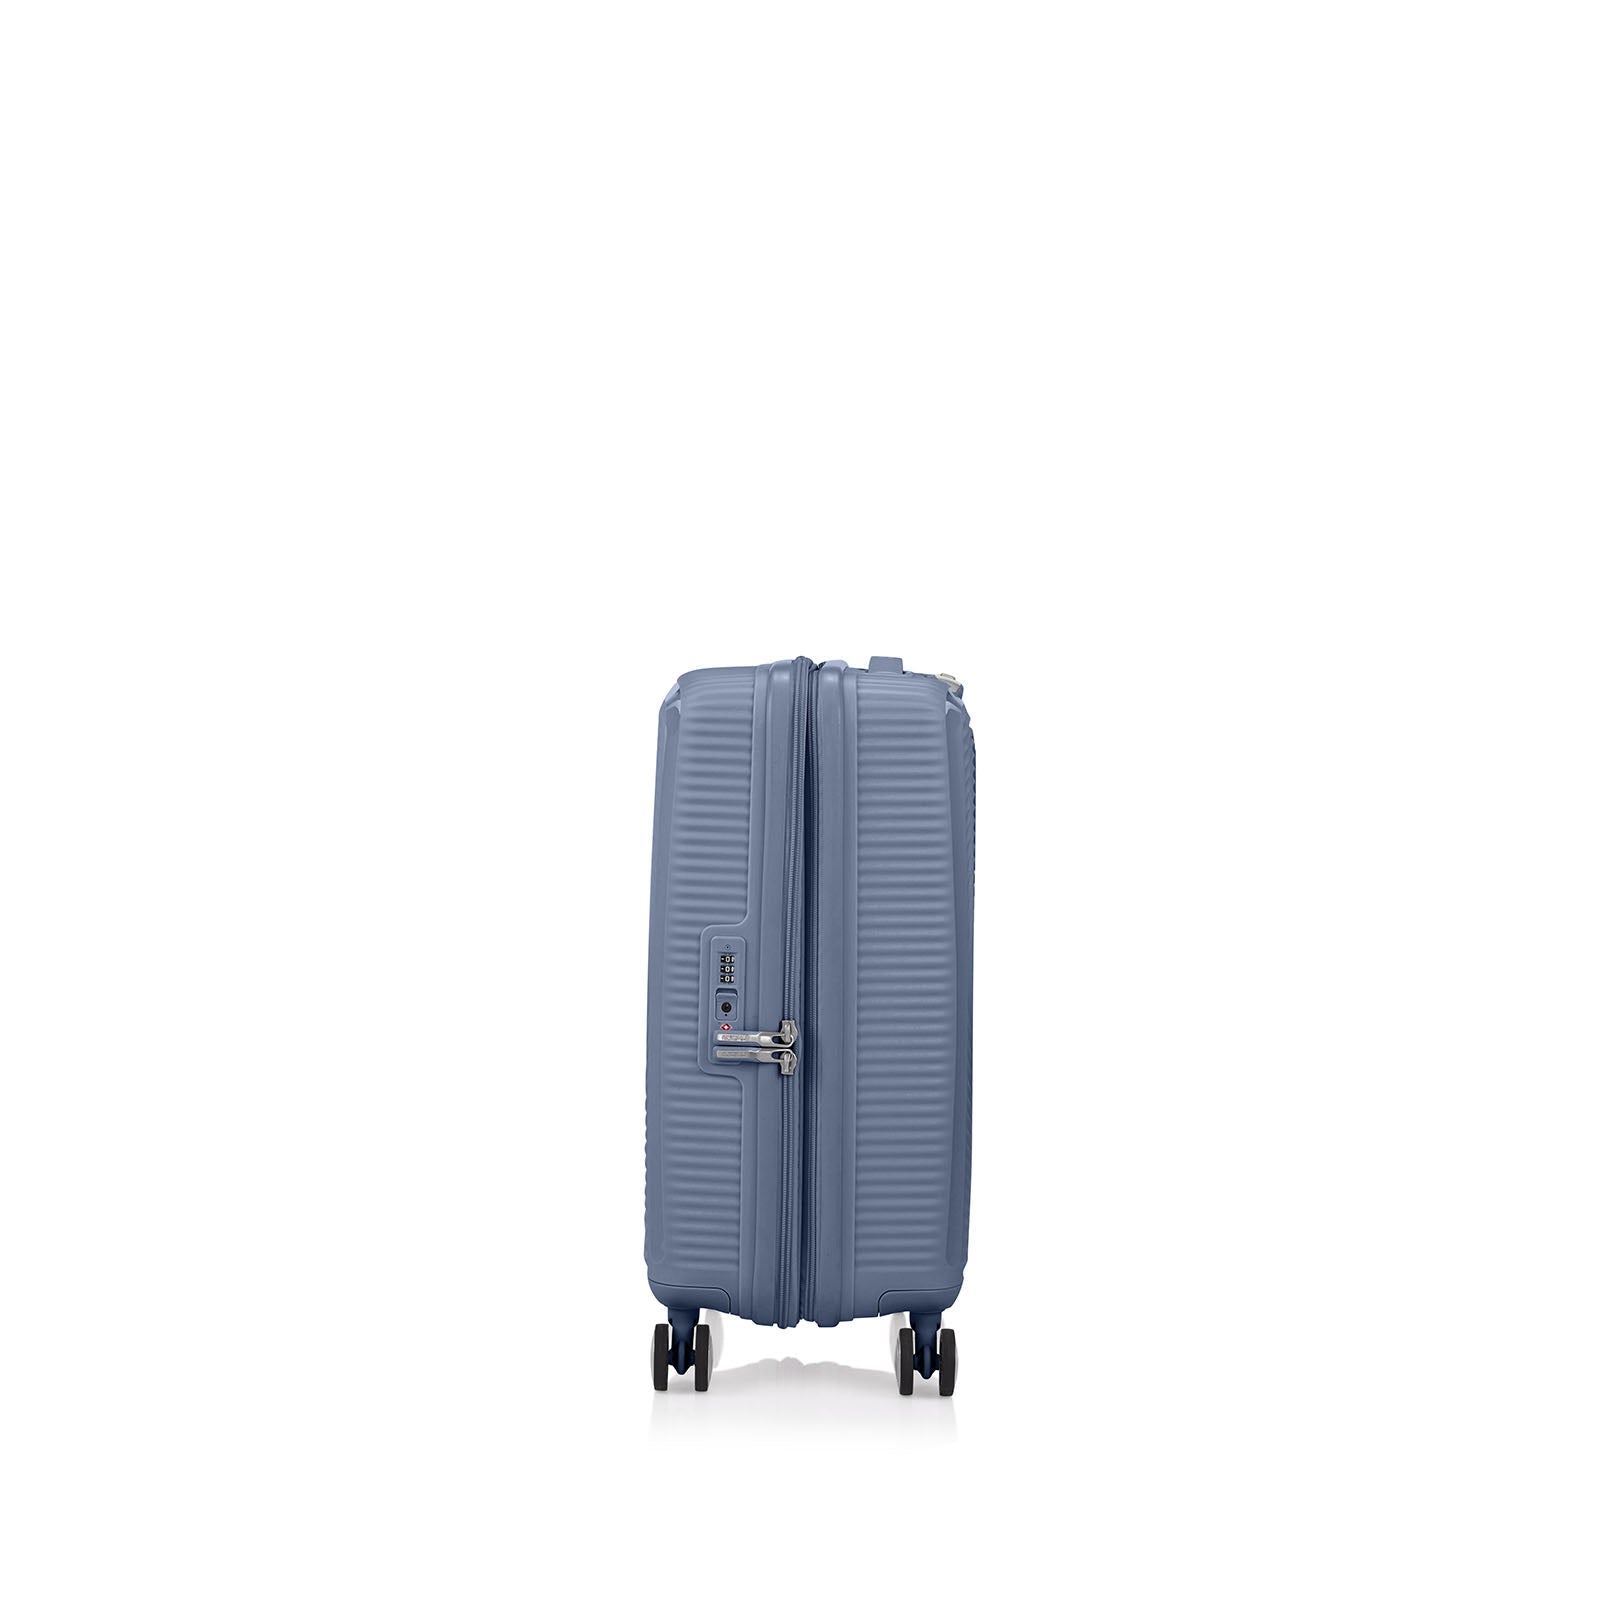 American-Tourister-Curio-2-55cm-Carry-On-Suitcase-Stone-Blue-Side